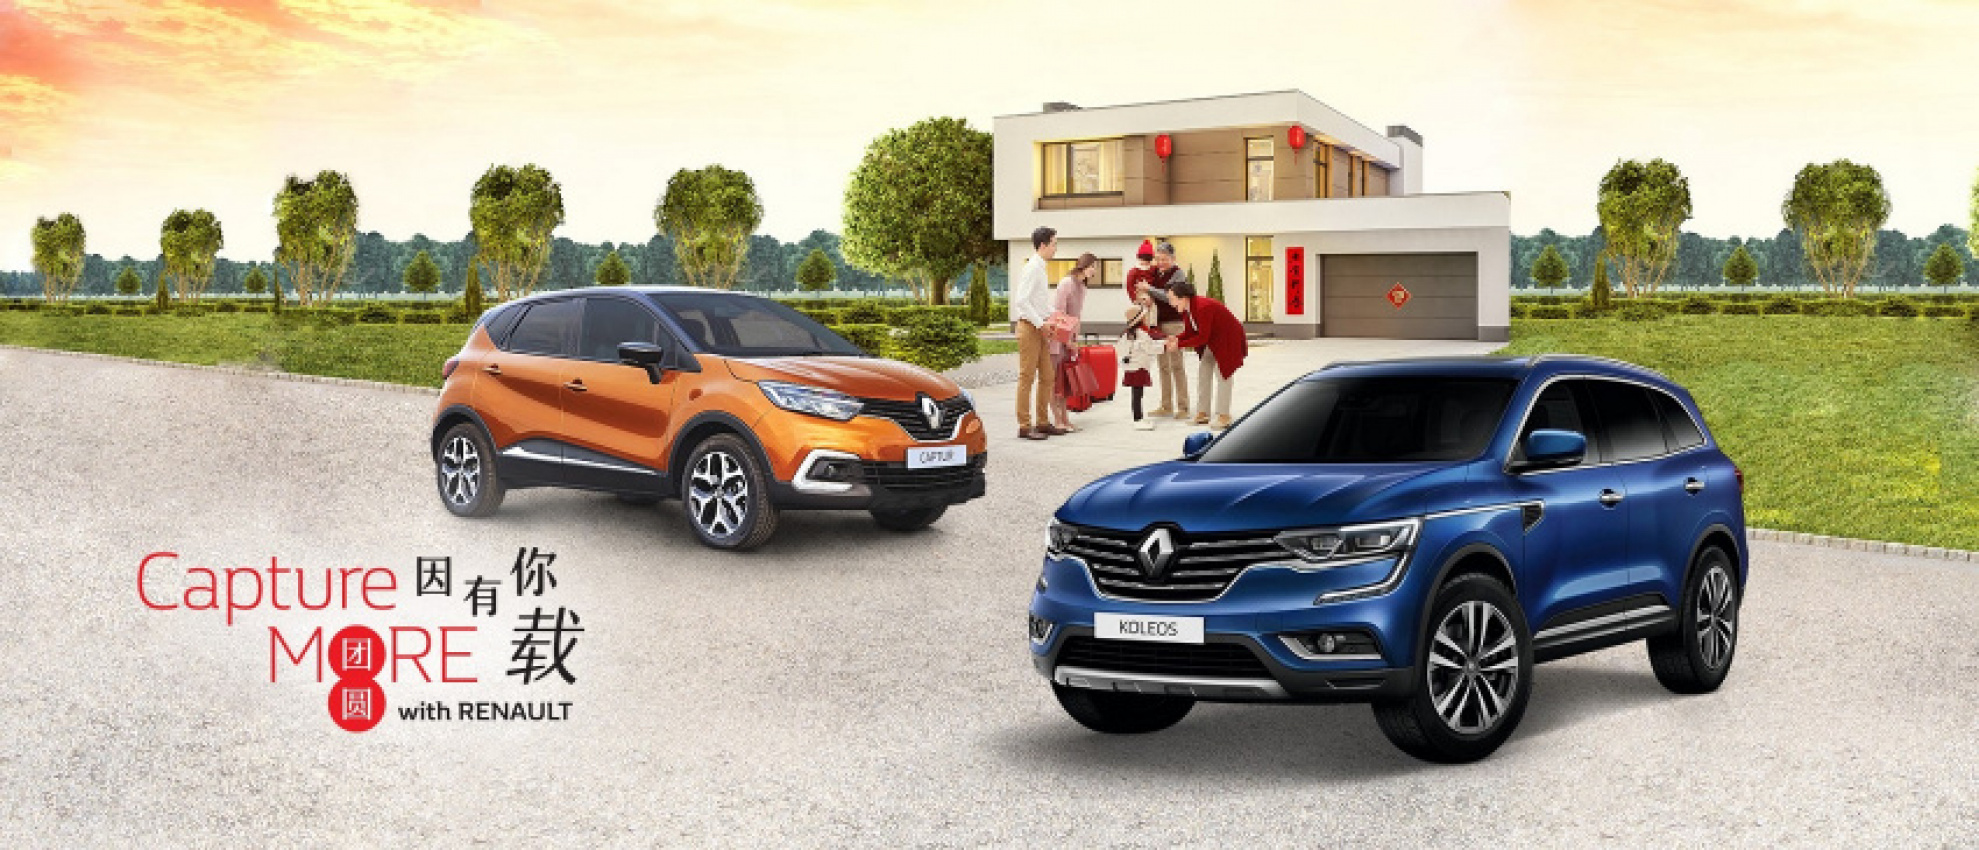 autos, car brands, cars, renault, cars, malaysia, promotion, tc euro cars, tcec, tc euro cars ‘capture more with renault’ campaign